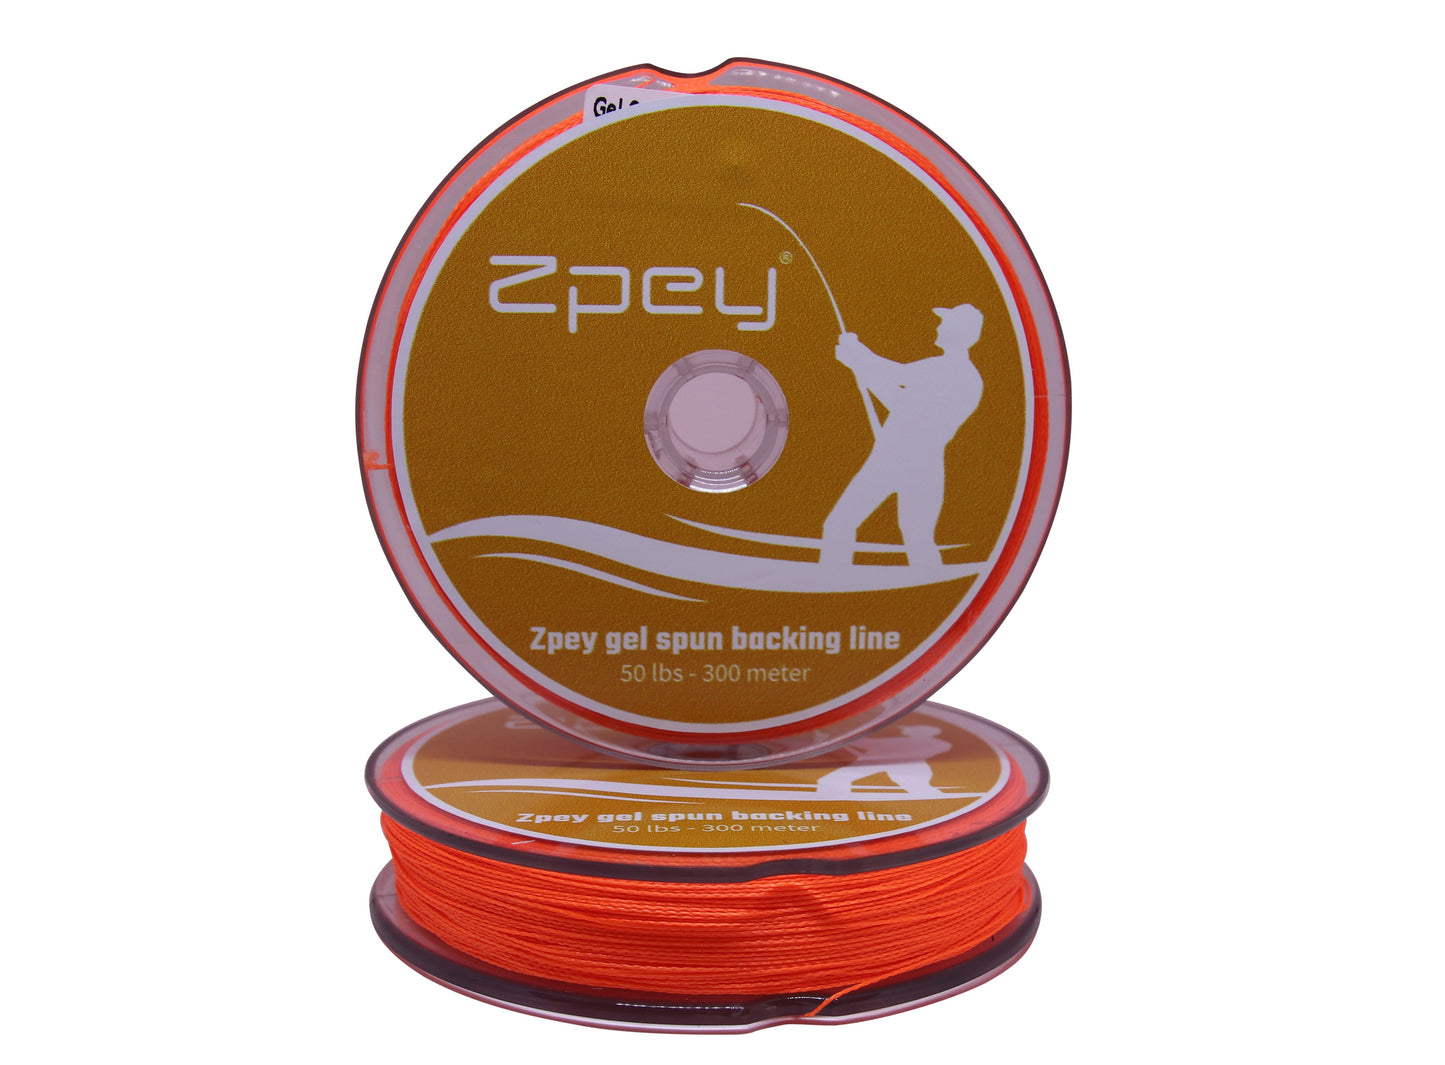 Backing line from Zpey orange